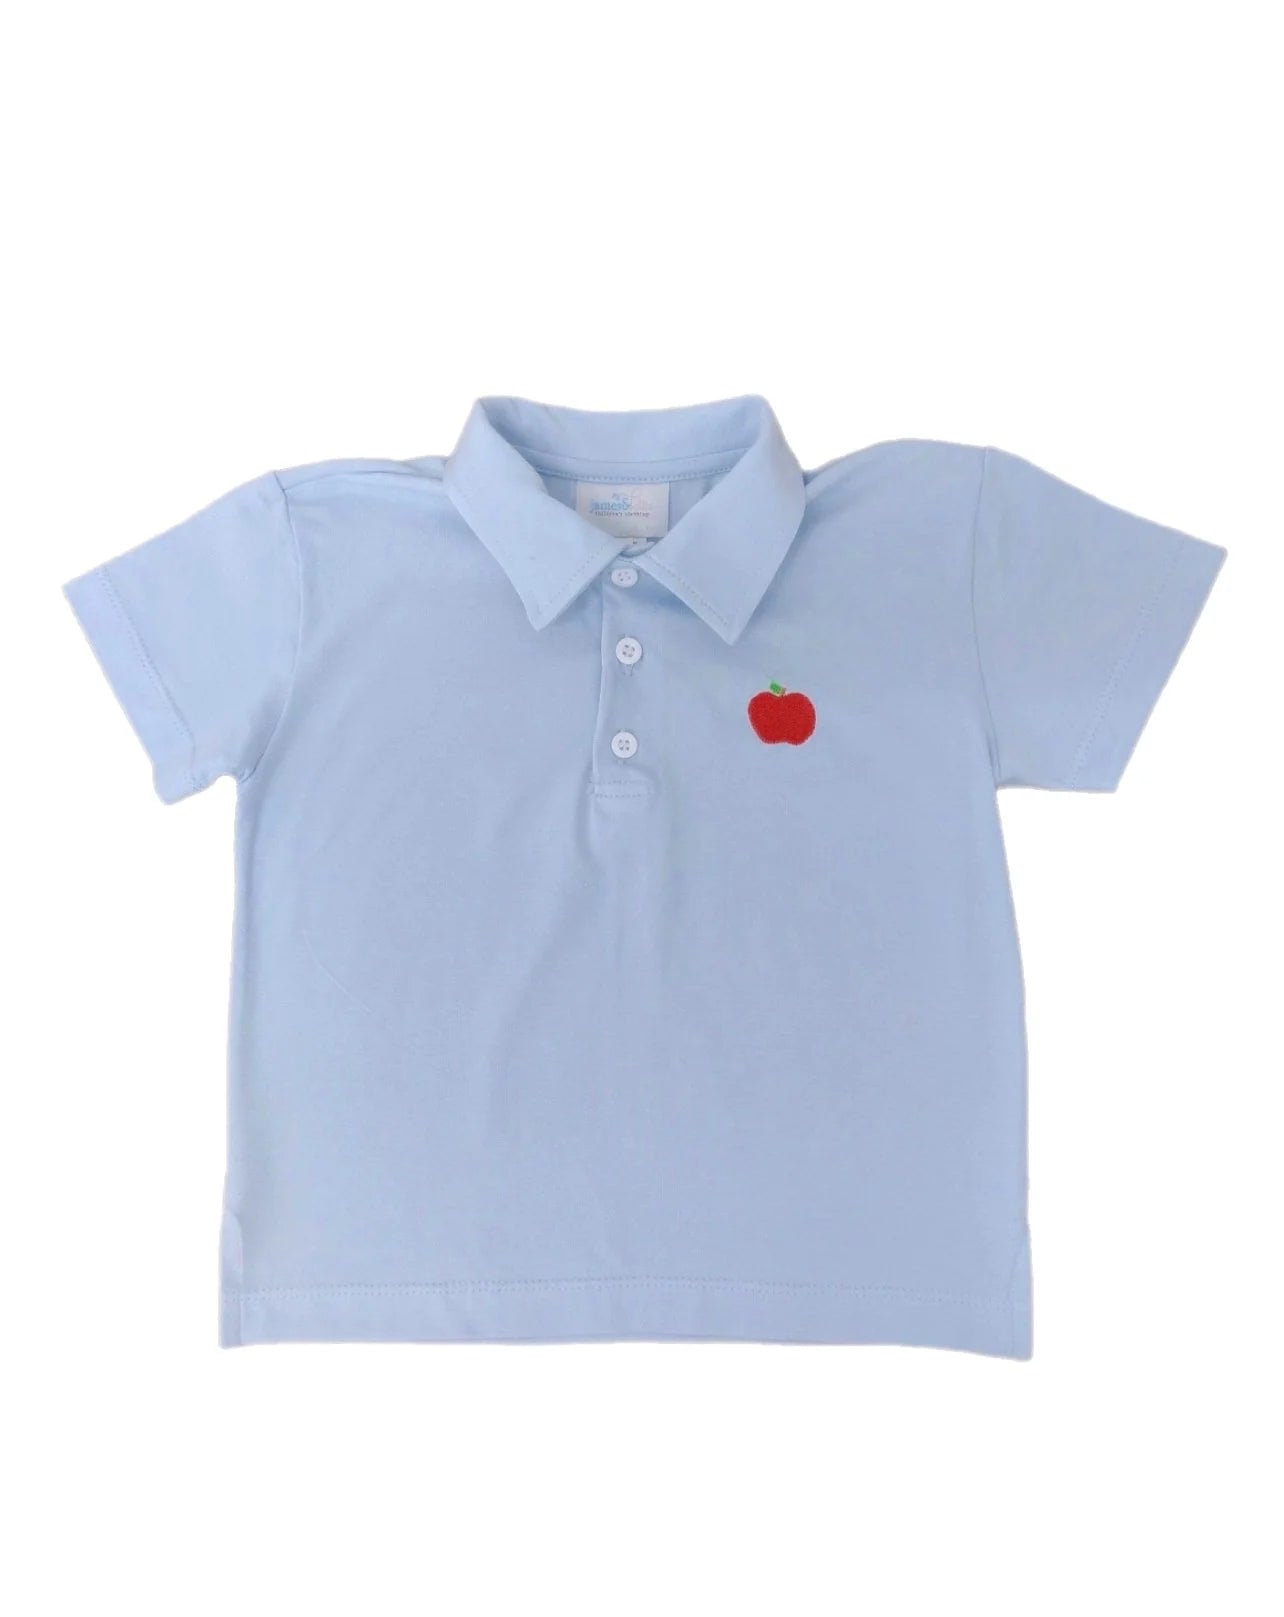 James and Lottie Blue Polo with Red Apple